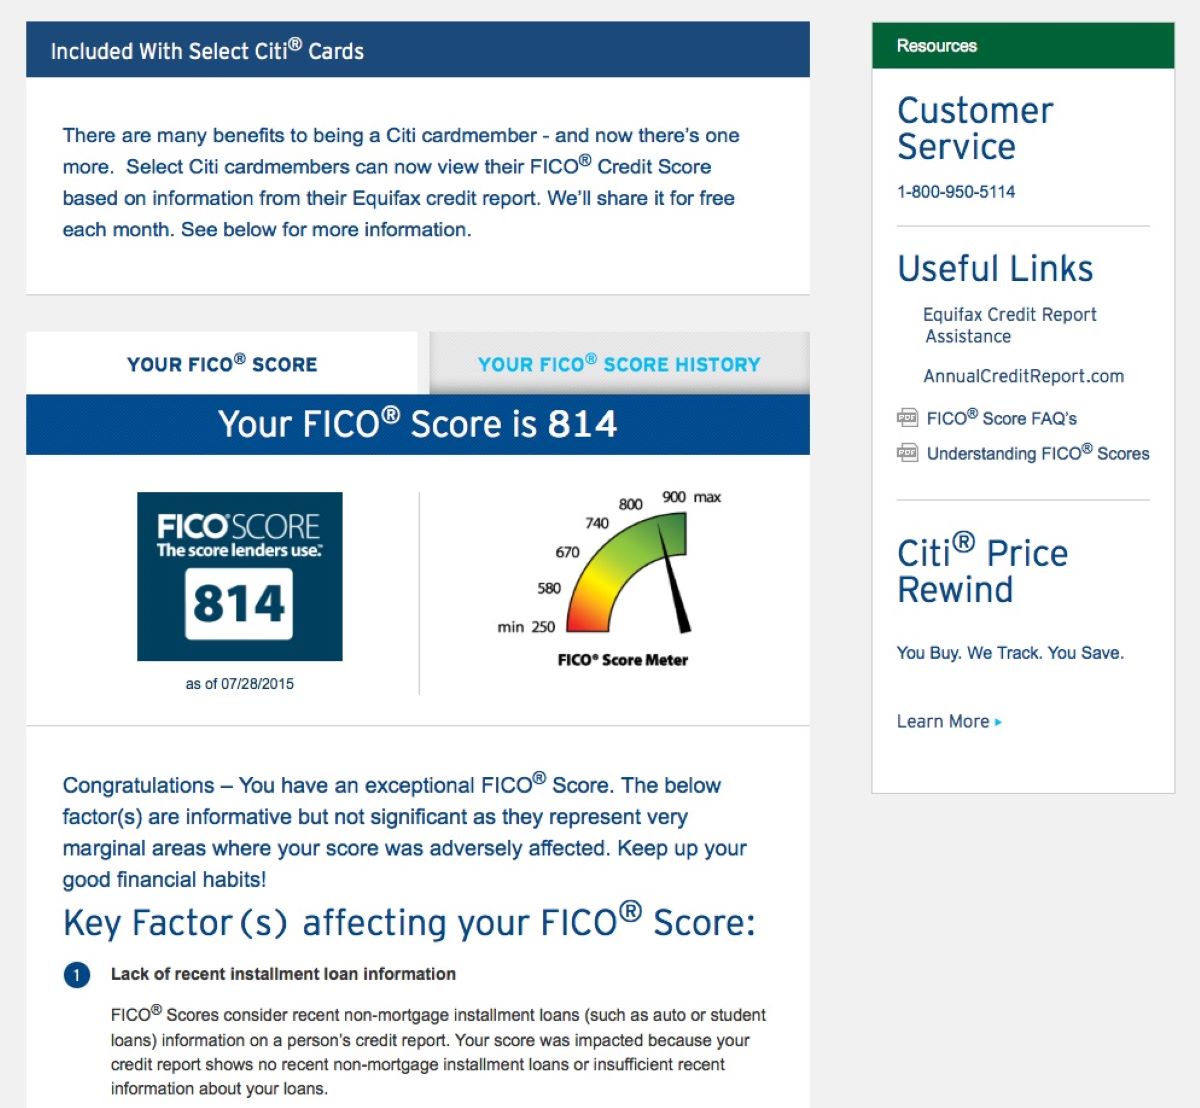 How To Check FICO Score On Citi App